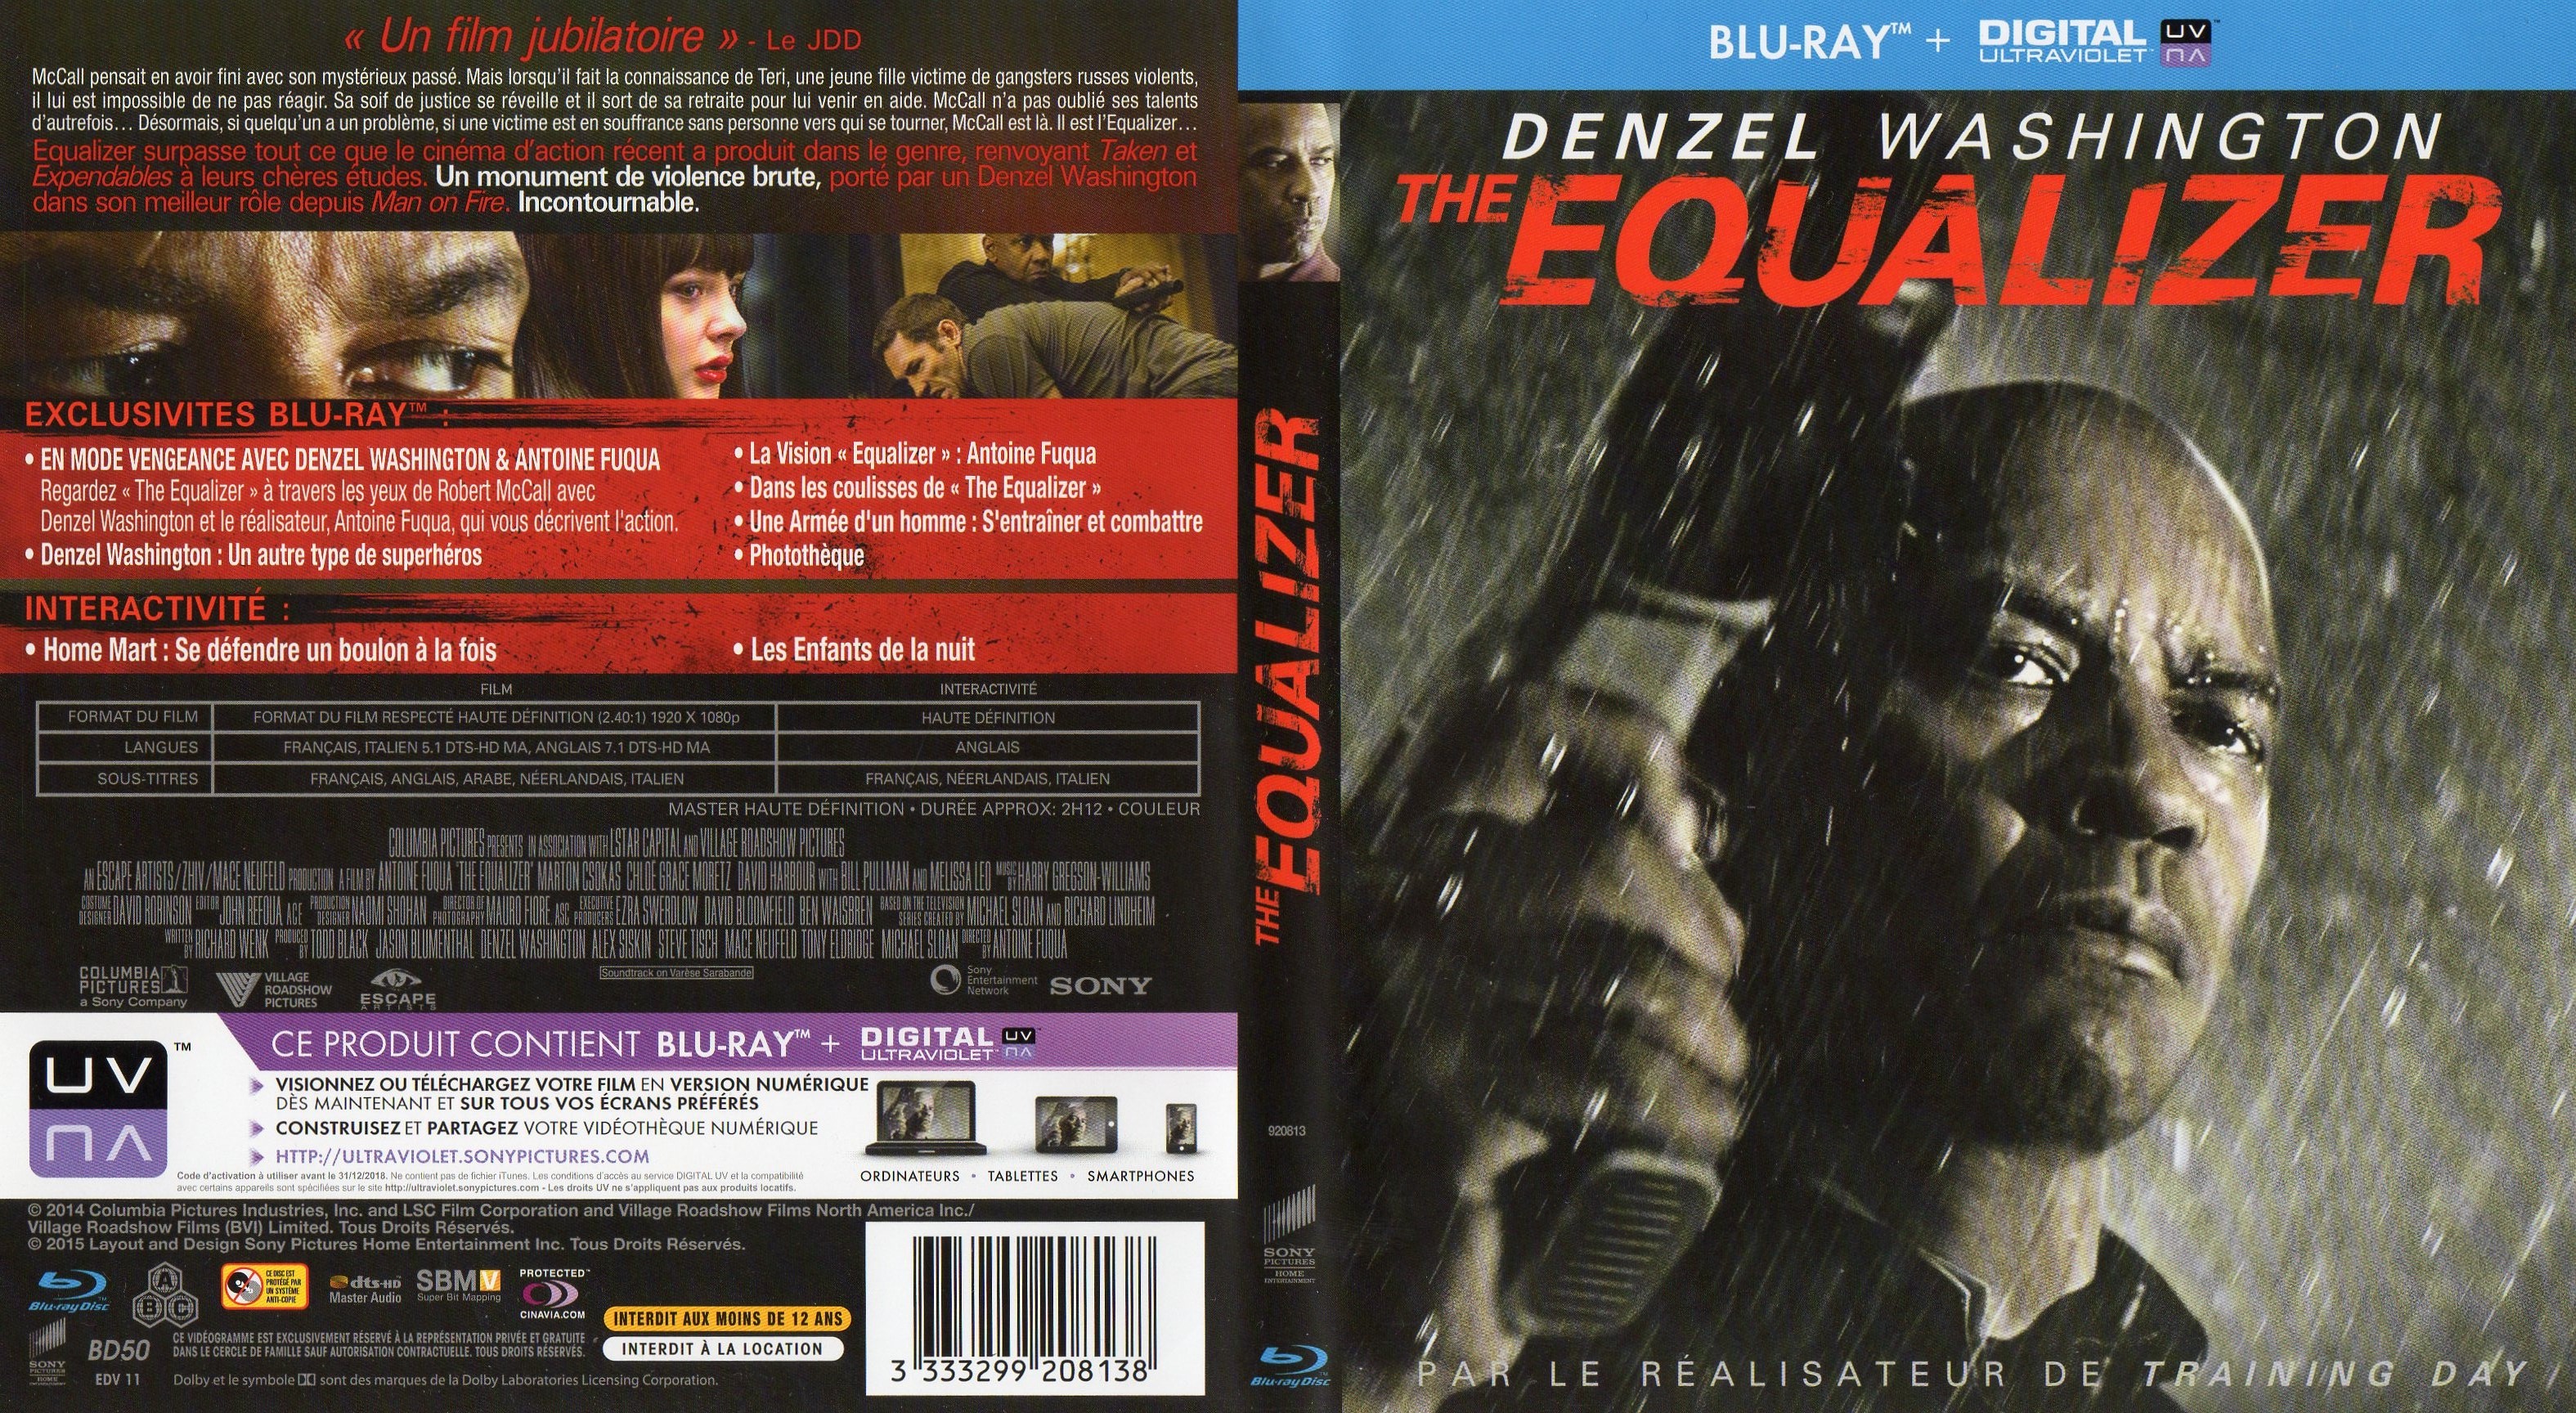 Jaquette DVD The equalizer (BLU-RAY) v2